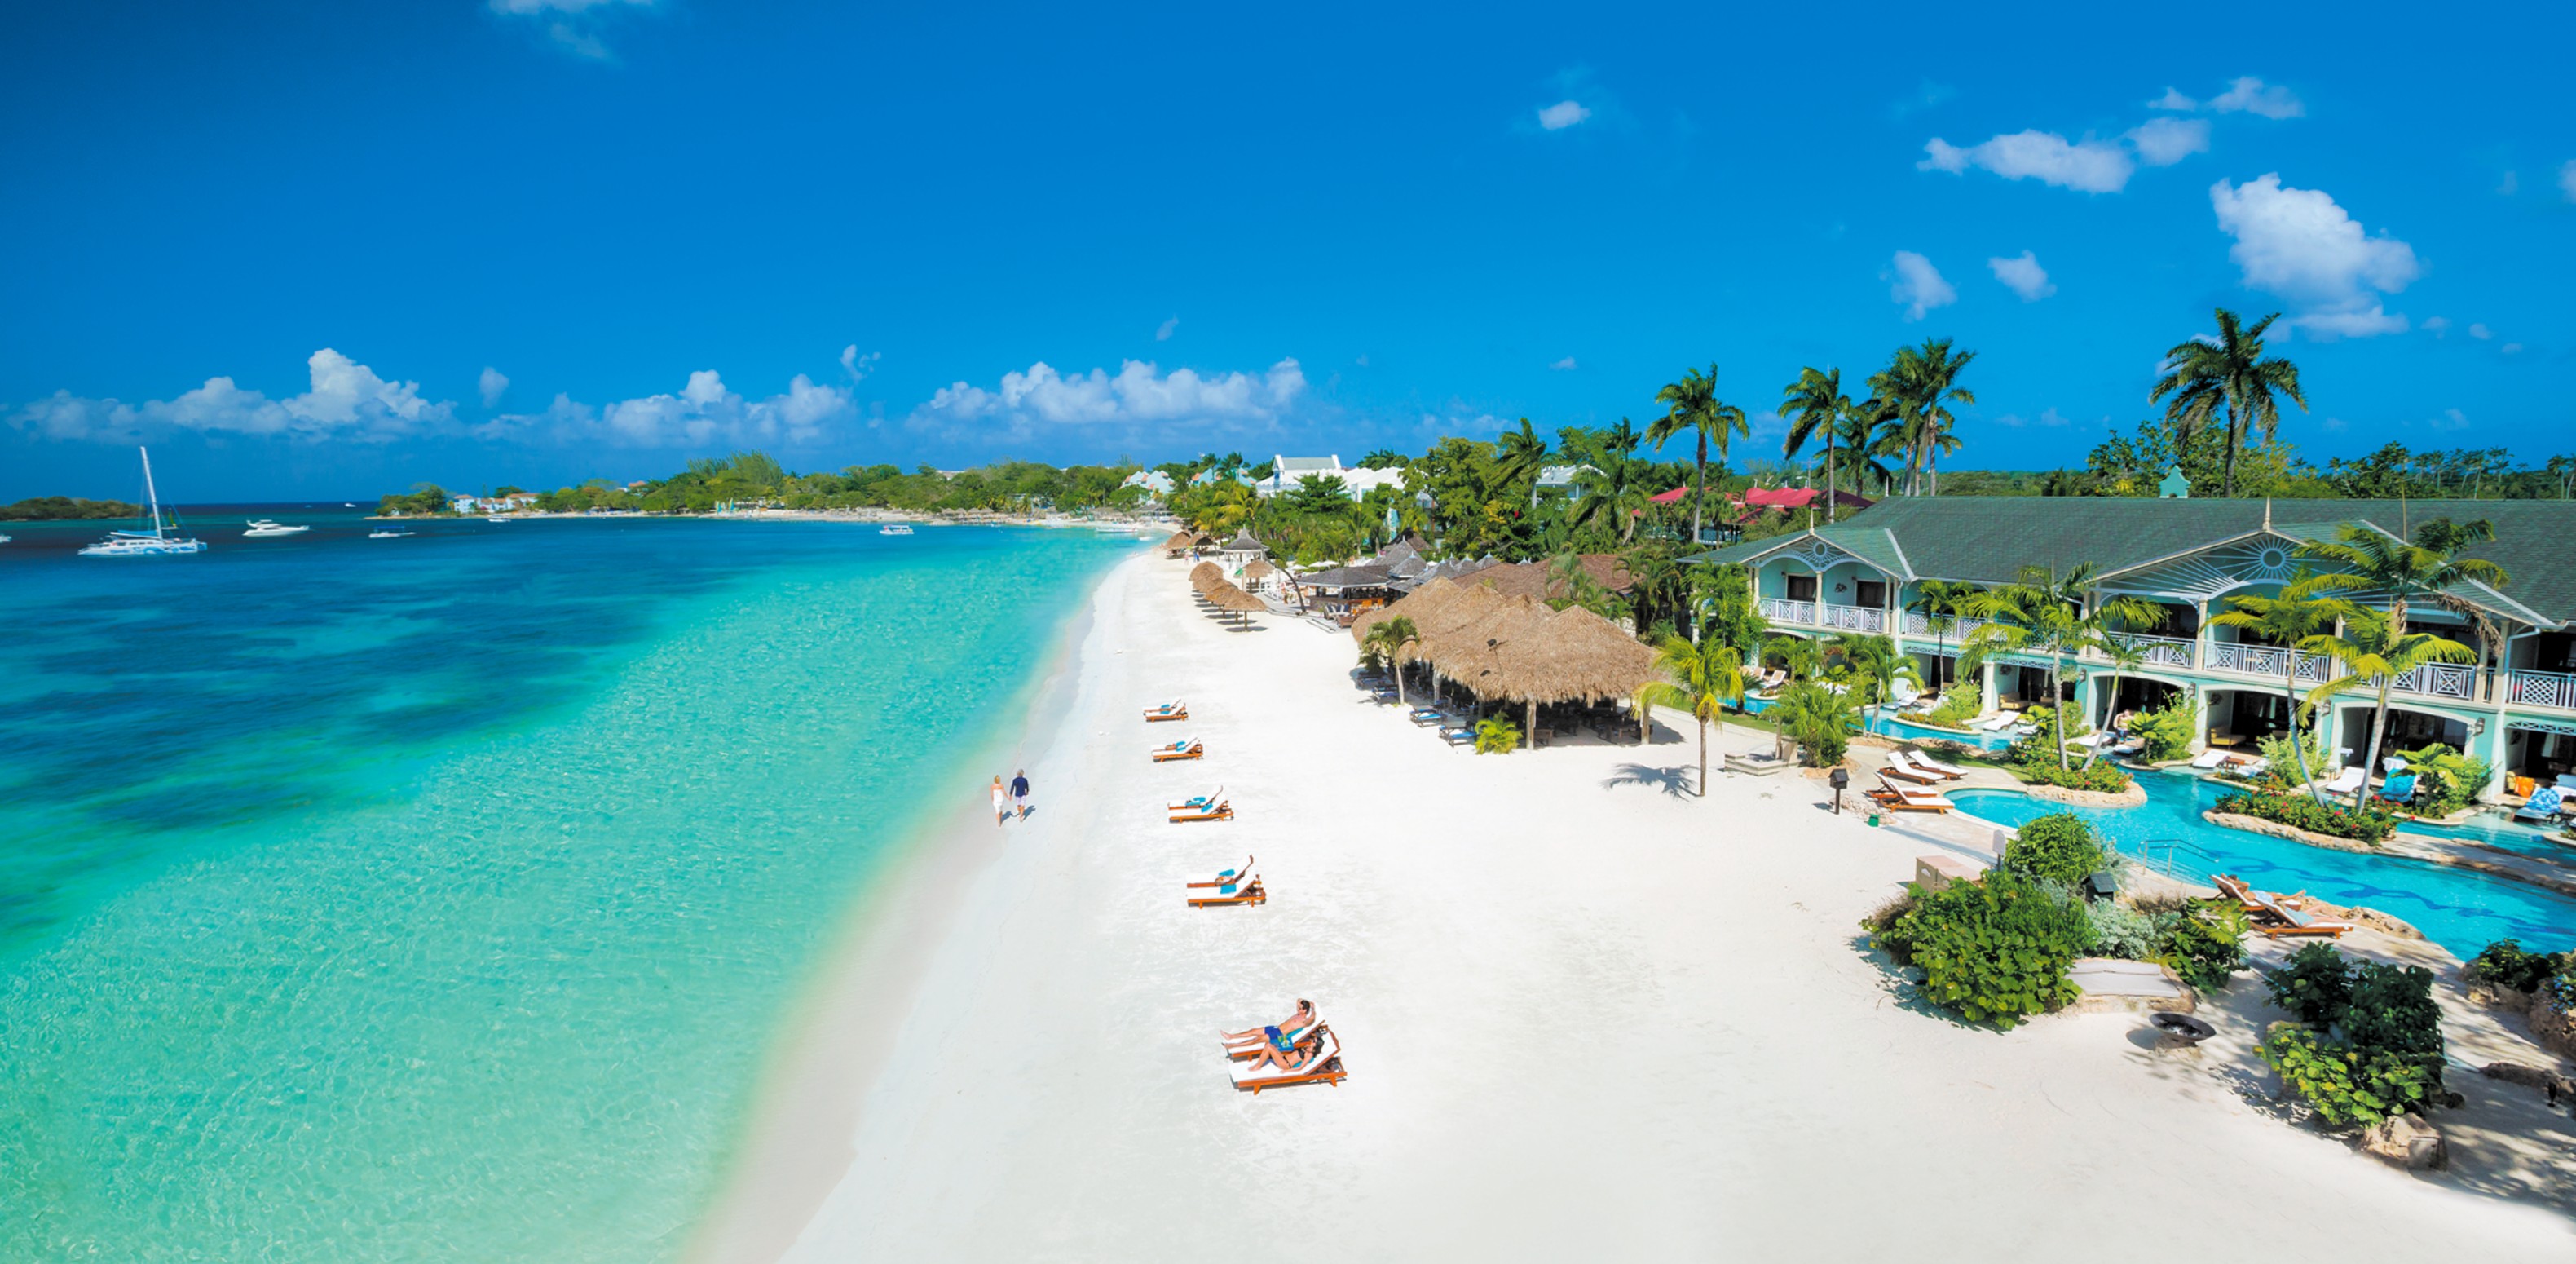 View the Resort Map of Sandals® Halcyon Beach